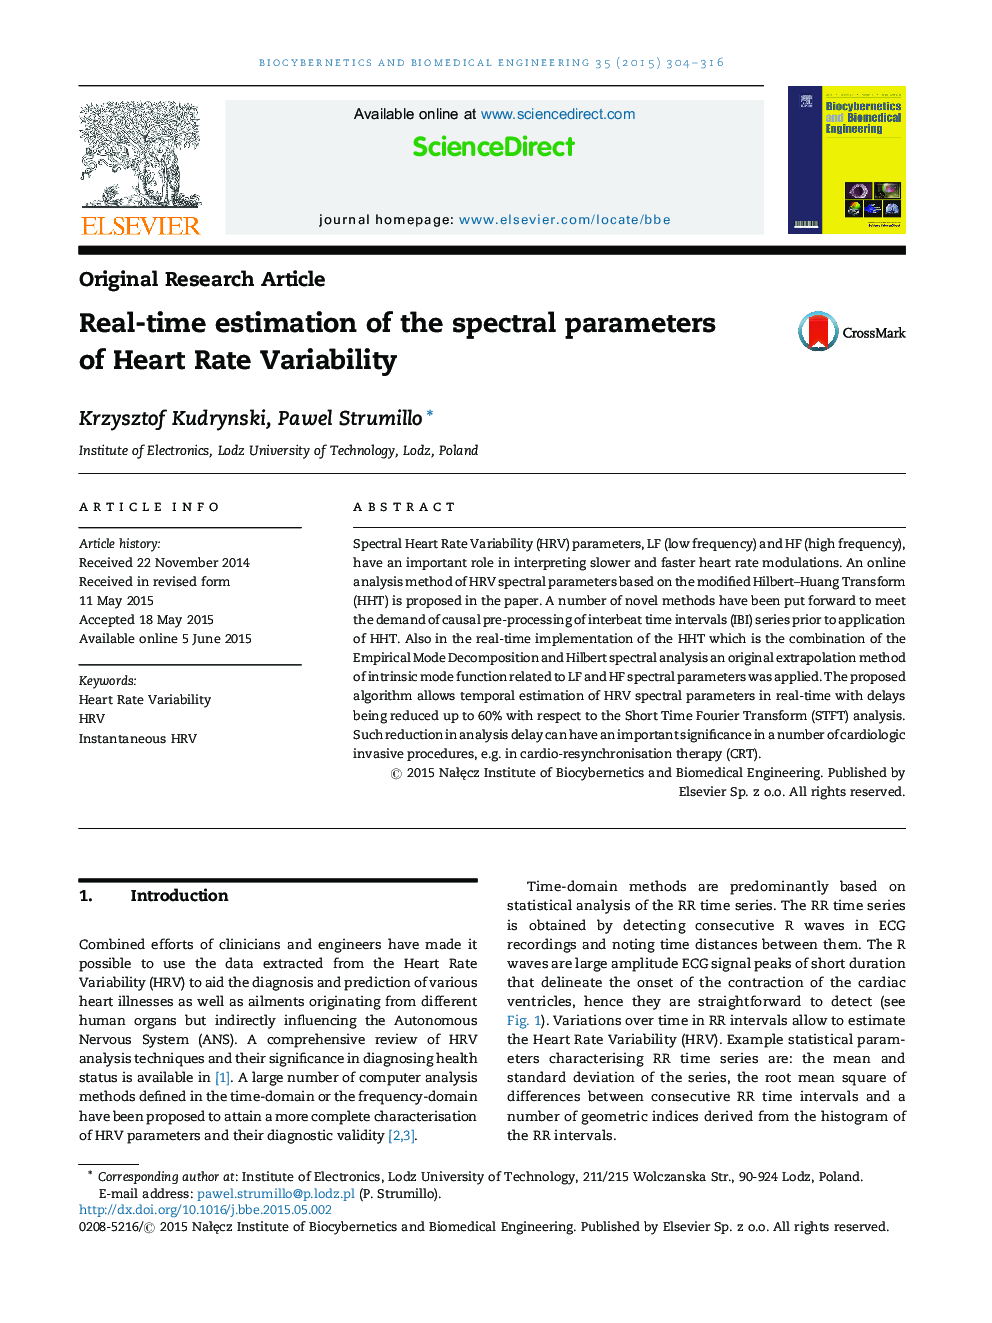 Real-time estimation of the spectral parameters of Heart Rate Variability